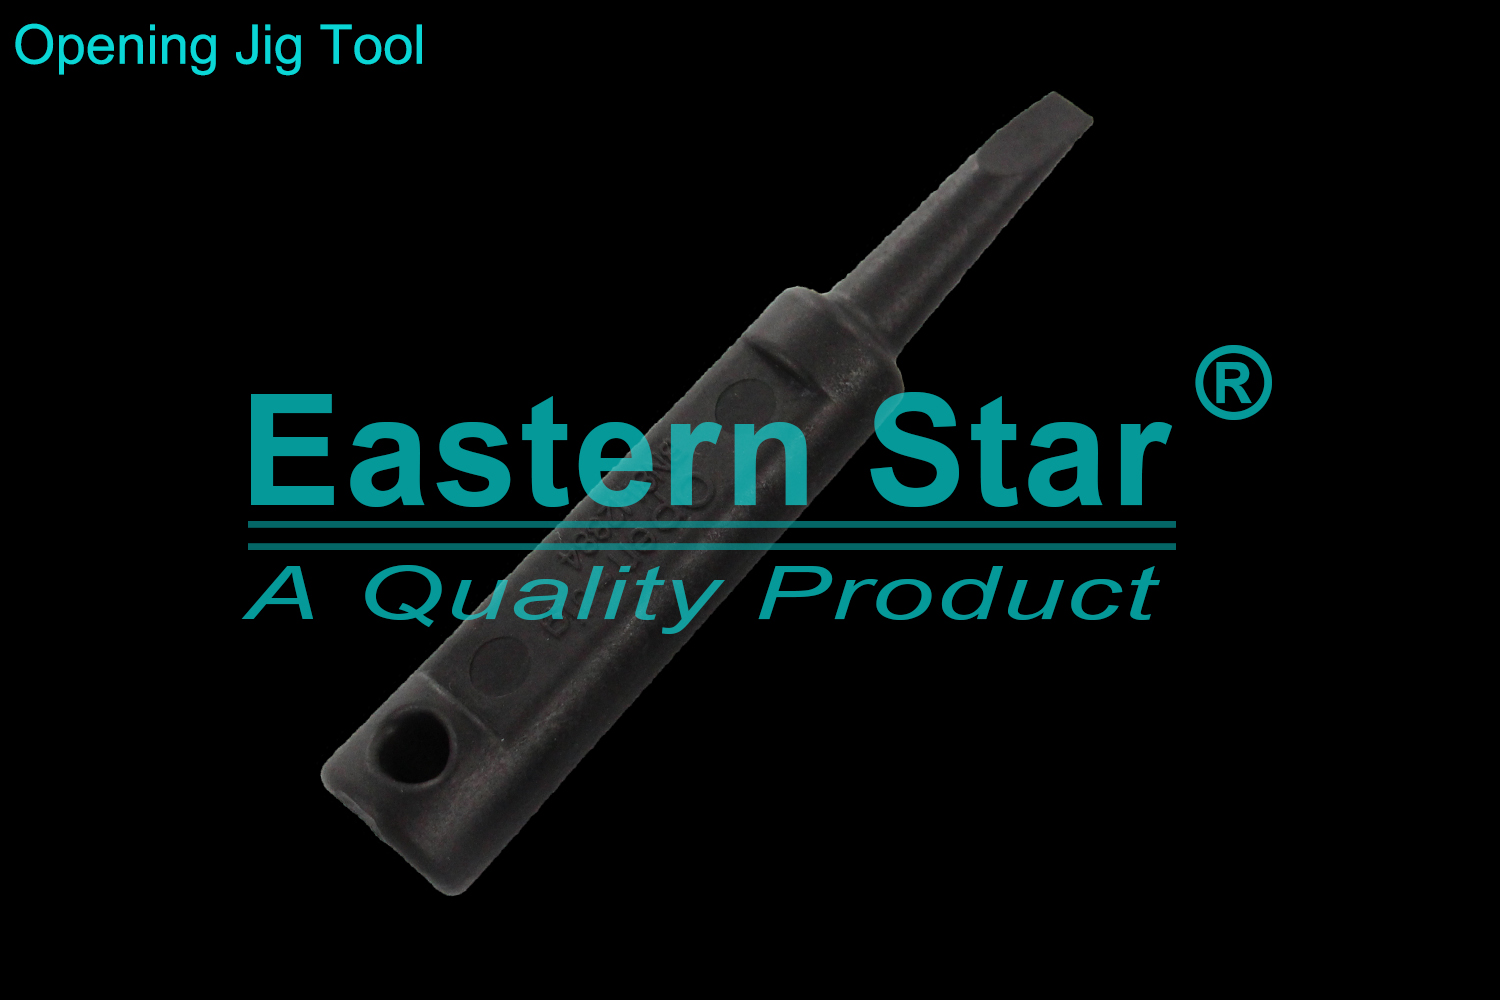 ES-JIG-002 TV Monitor Opening Jig Tool for Samsung TV no-screw rear back covers Dismantling tools BN81-12884 (1)